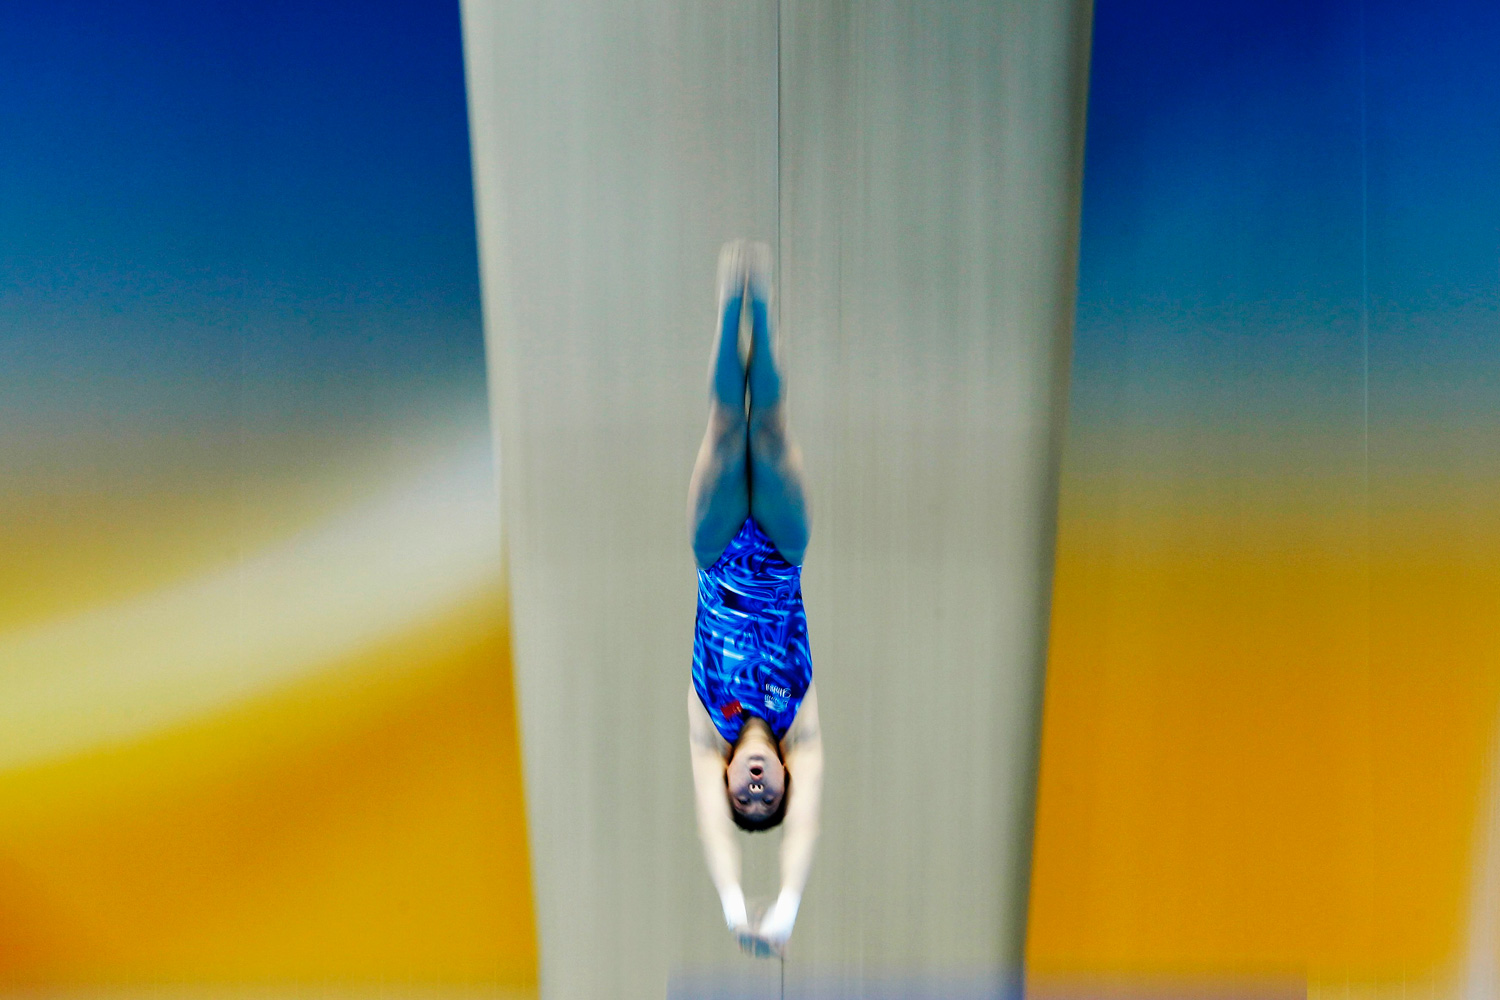 Feb. 21, 2012. Chen Ruolin of China dives in the semi-final of the women's 10m Platform competition at the FINA Diving World Cup at the Olympic Aquatics Centre in London.